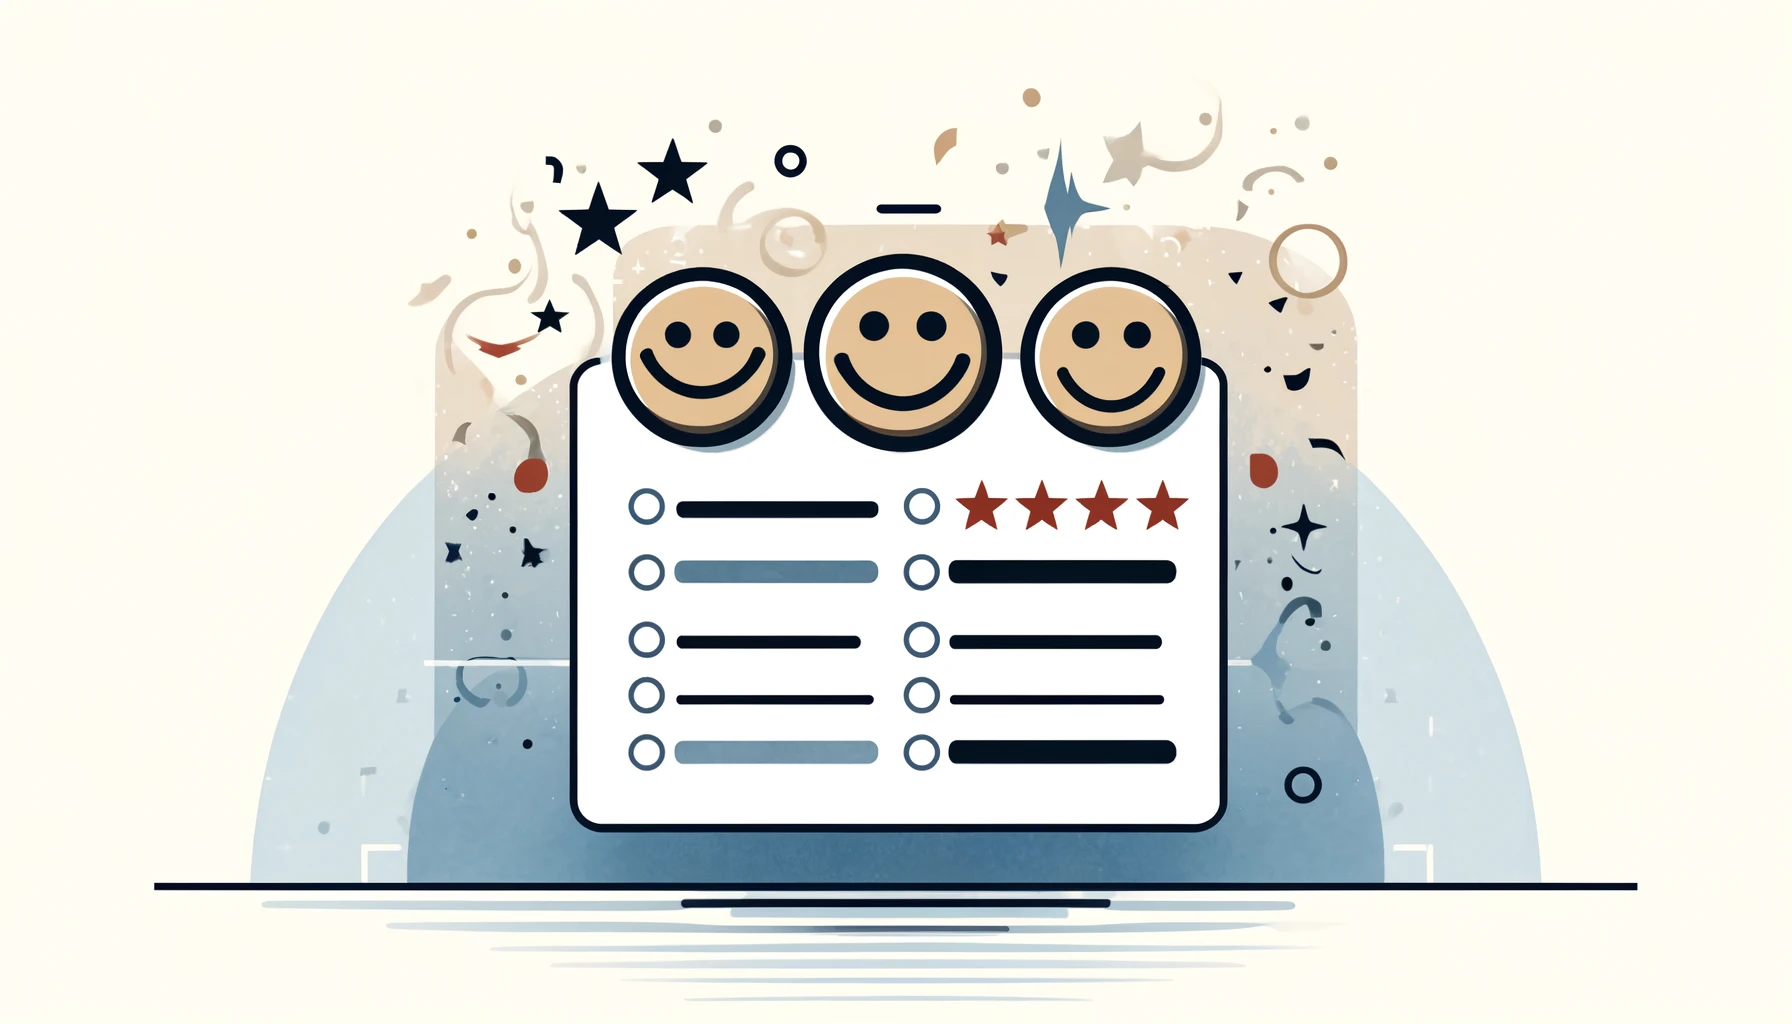 What is Customer Satisfaction Index Meaning?